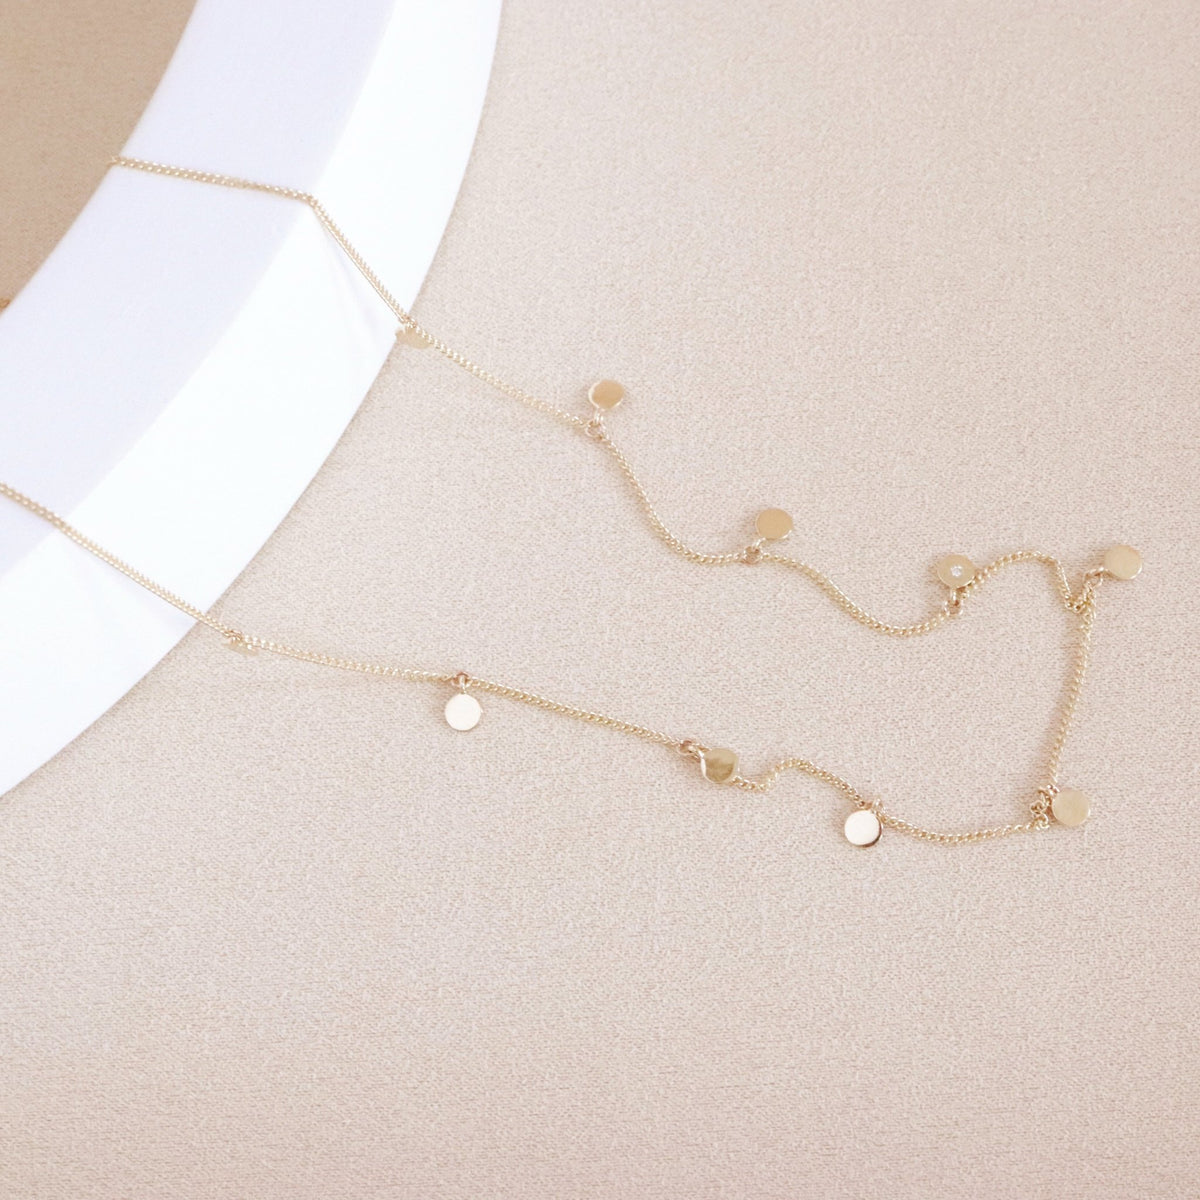 DAINTY POISE DISK NECKLACE - SOLID 14K GOLD - SO PRETTY CARA COTTER